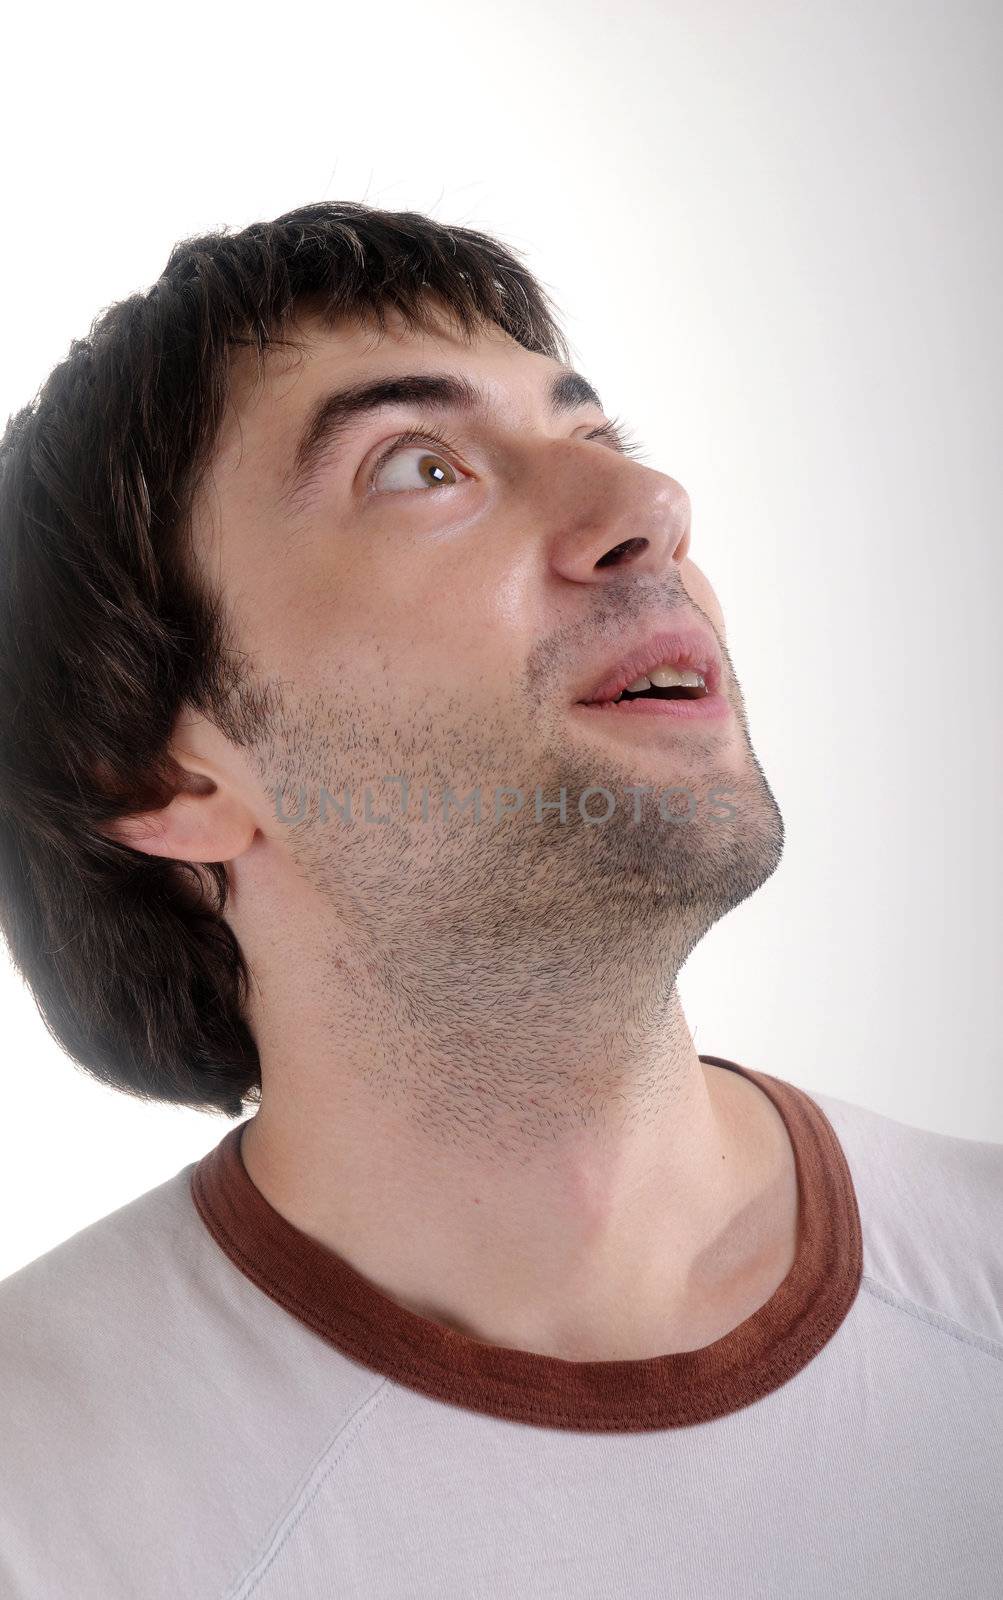 Surprised young man on white background